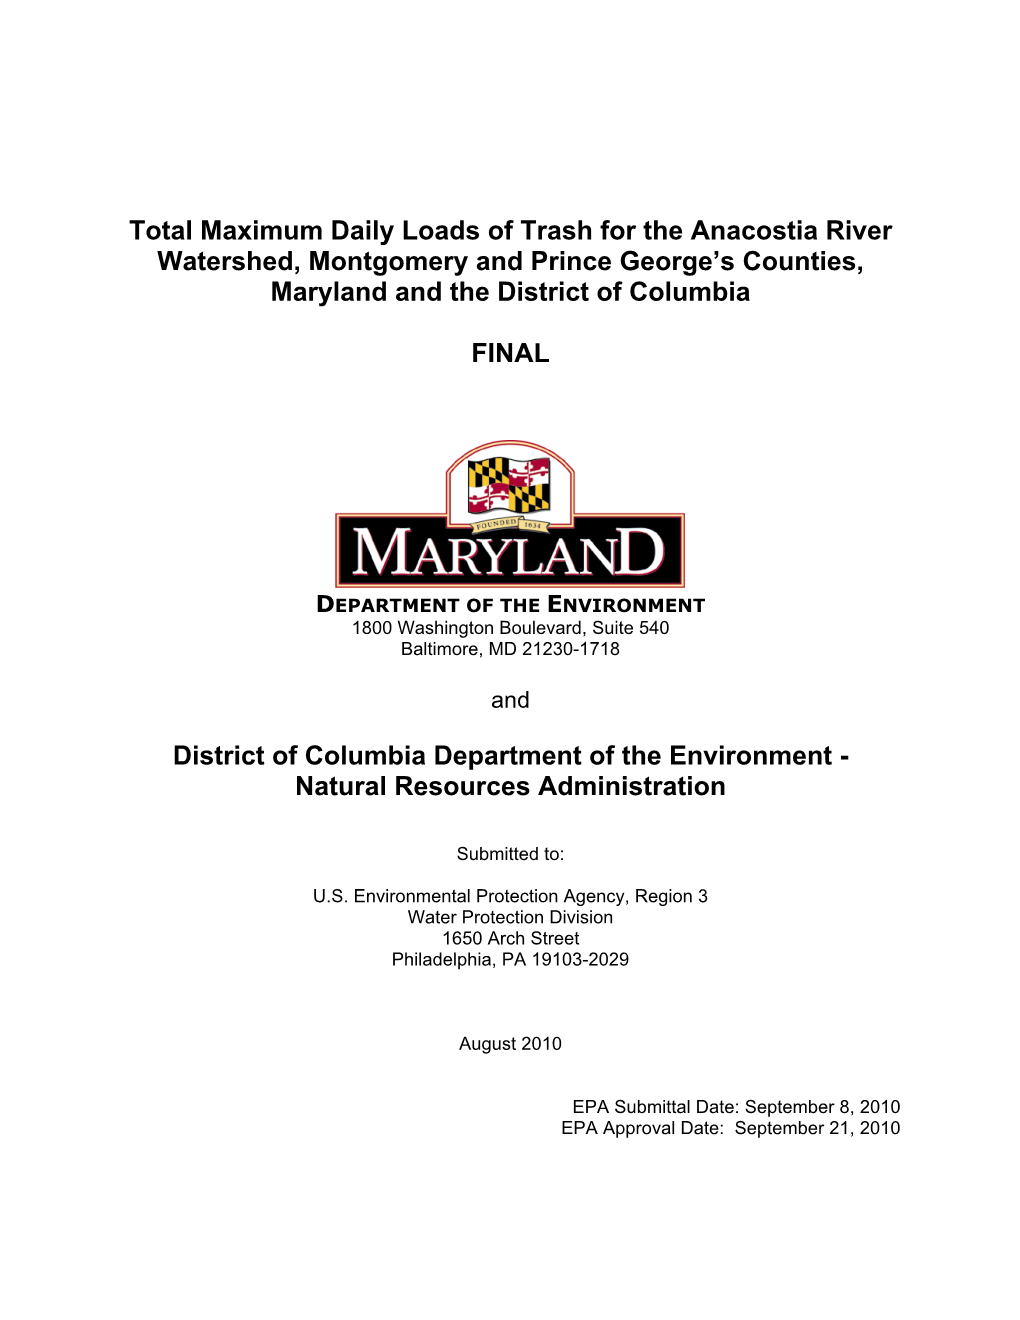 Total Maximum Daily Loads of Trash for the Anacostia River Watershed, Montgomery and Prince George’S Counties, Maryland and the District of Columbia